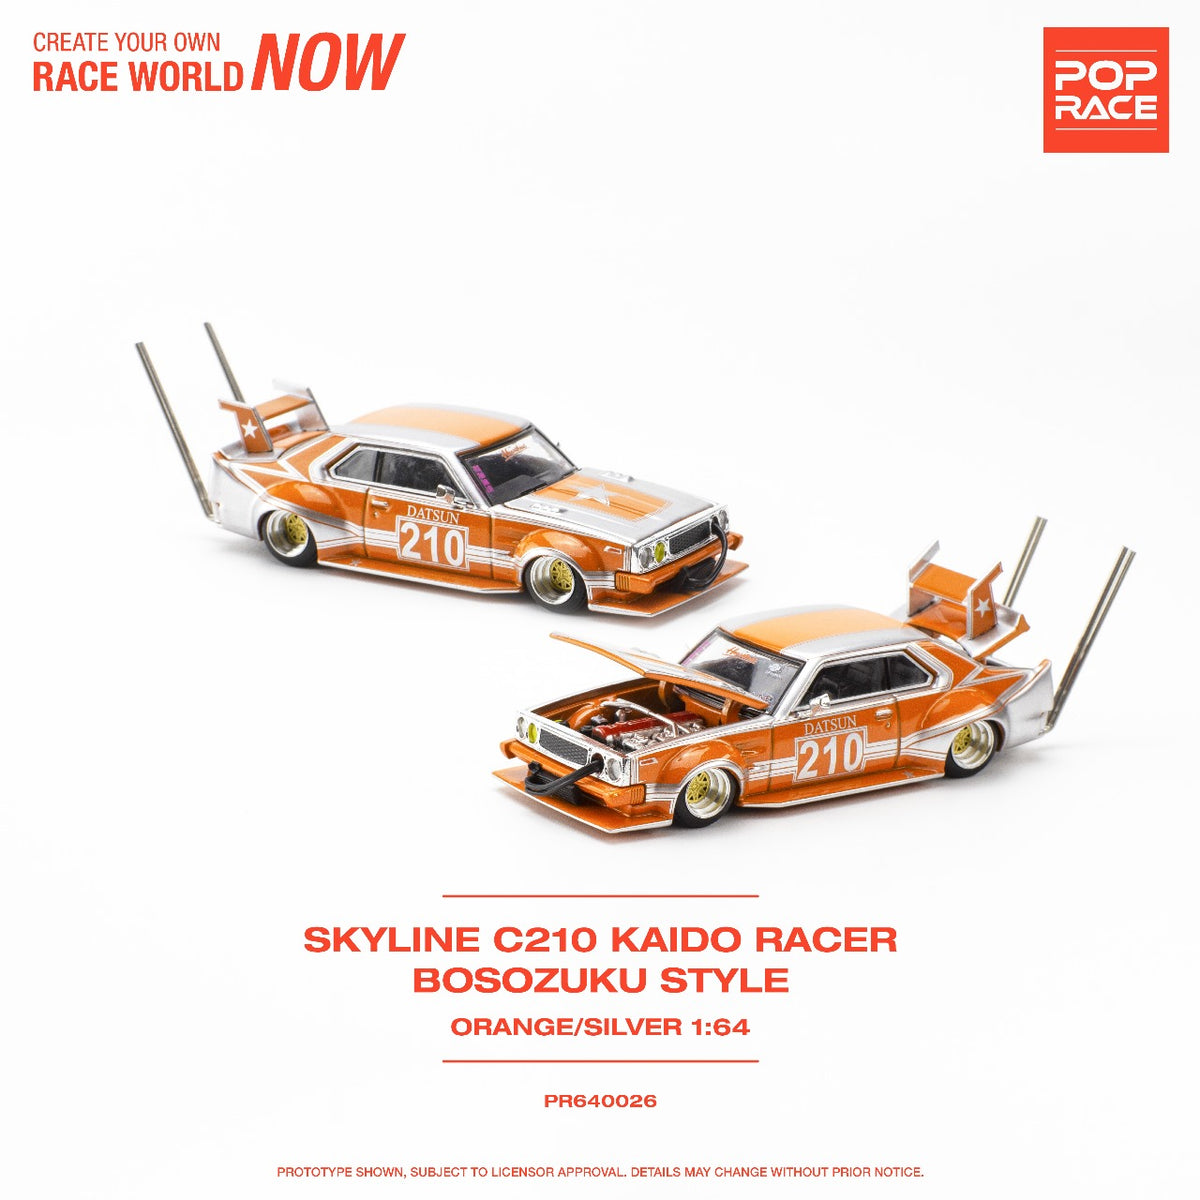 PREORDER POPRACE 1/64 Skyline C210 Kaido Racer - Bosozoku Style  Silver/Orange PR640026 (Approx. Release Date: Q4 2023 and subject to the 